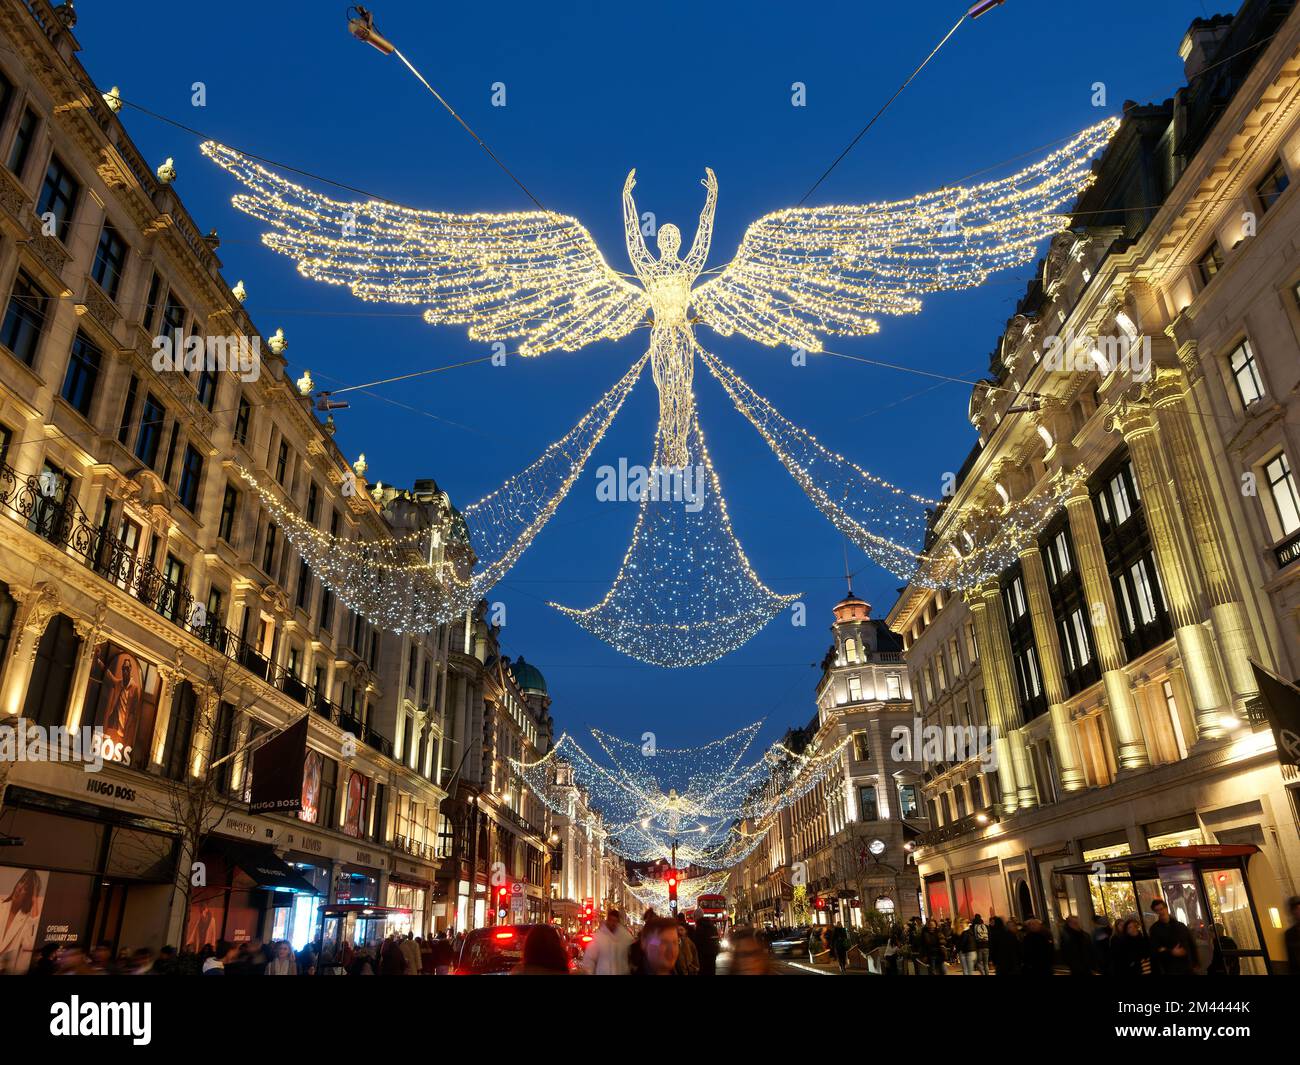 View looking up at the festive Christmas Angel decorations at night in Regent Street London 2022 Stock Photo